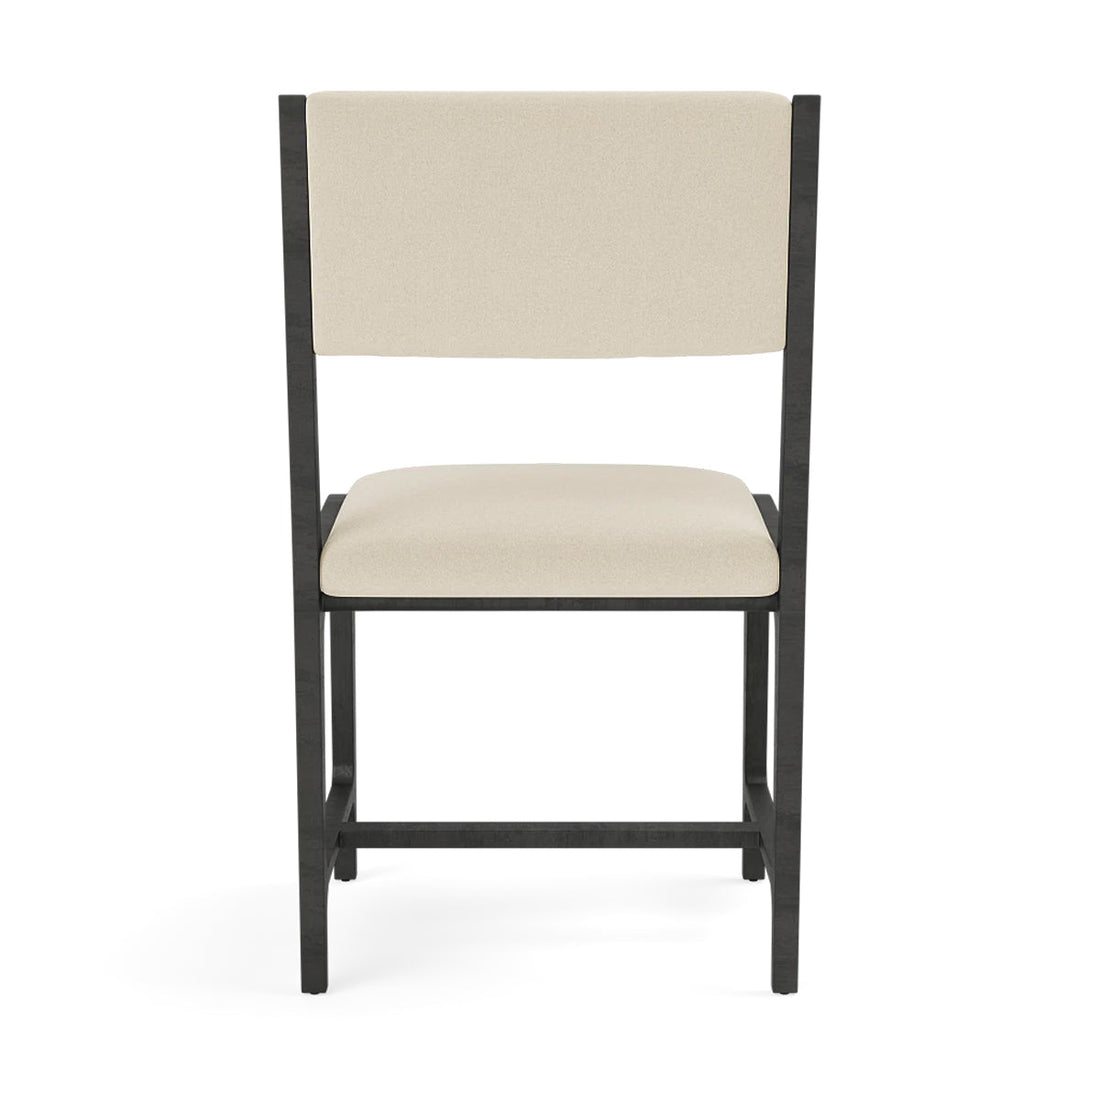 Made Goods Vallois Contemporary Metal Side Chair, Nile Fabric